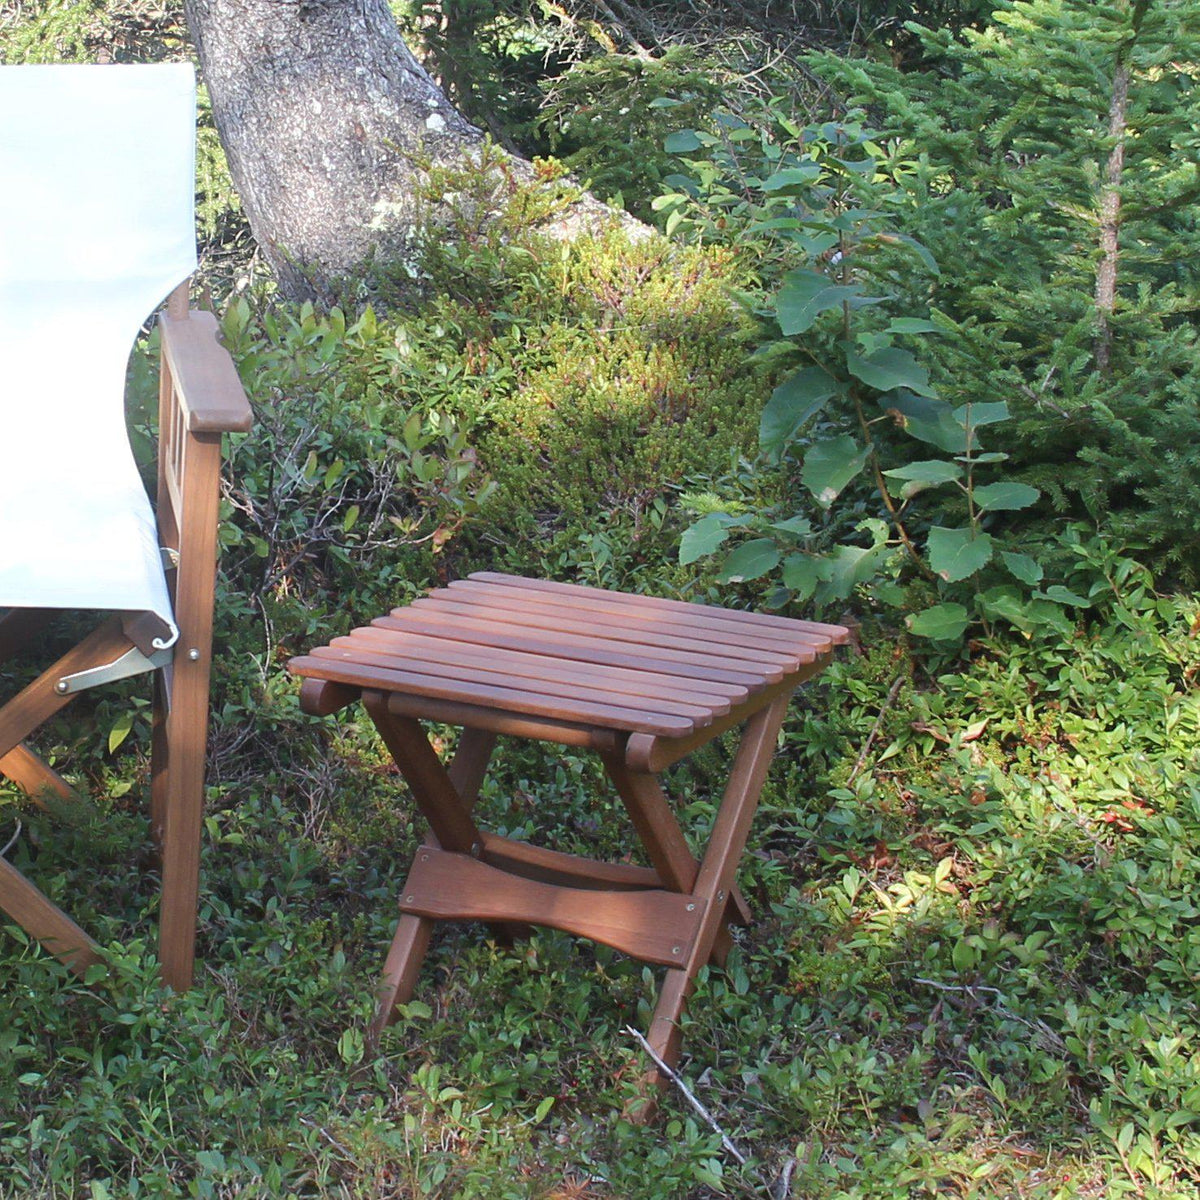 Pangean Folding Table - Small -- Outlet Stock